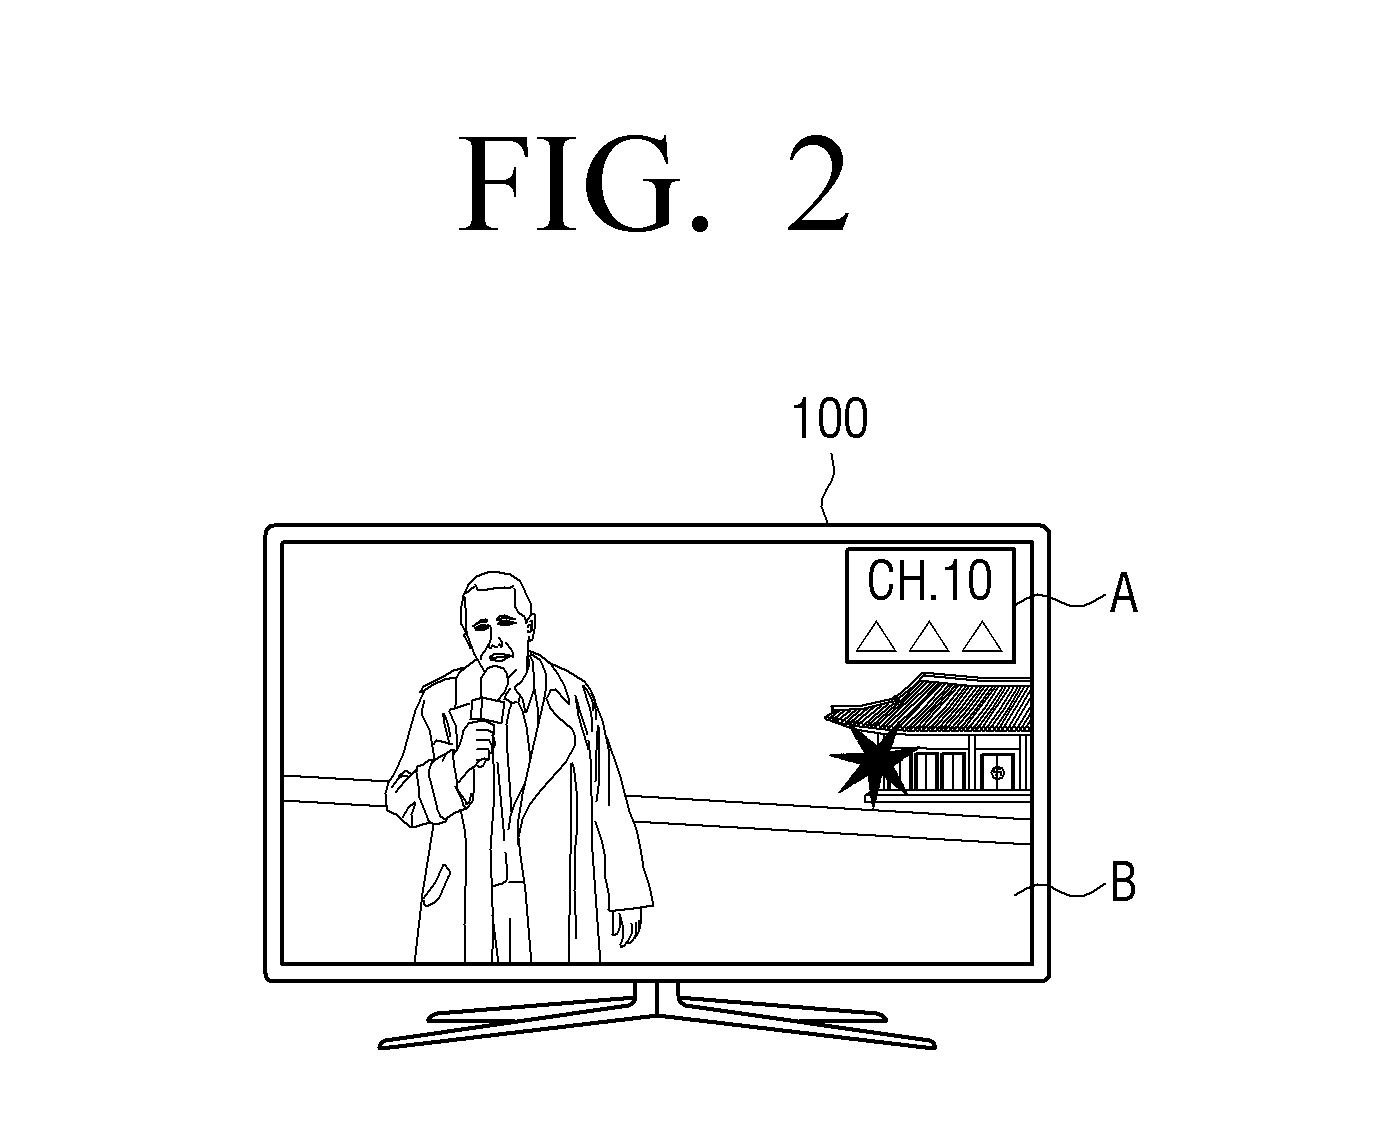 Display apparatus and control method for reducing image sticking